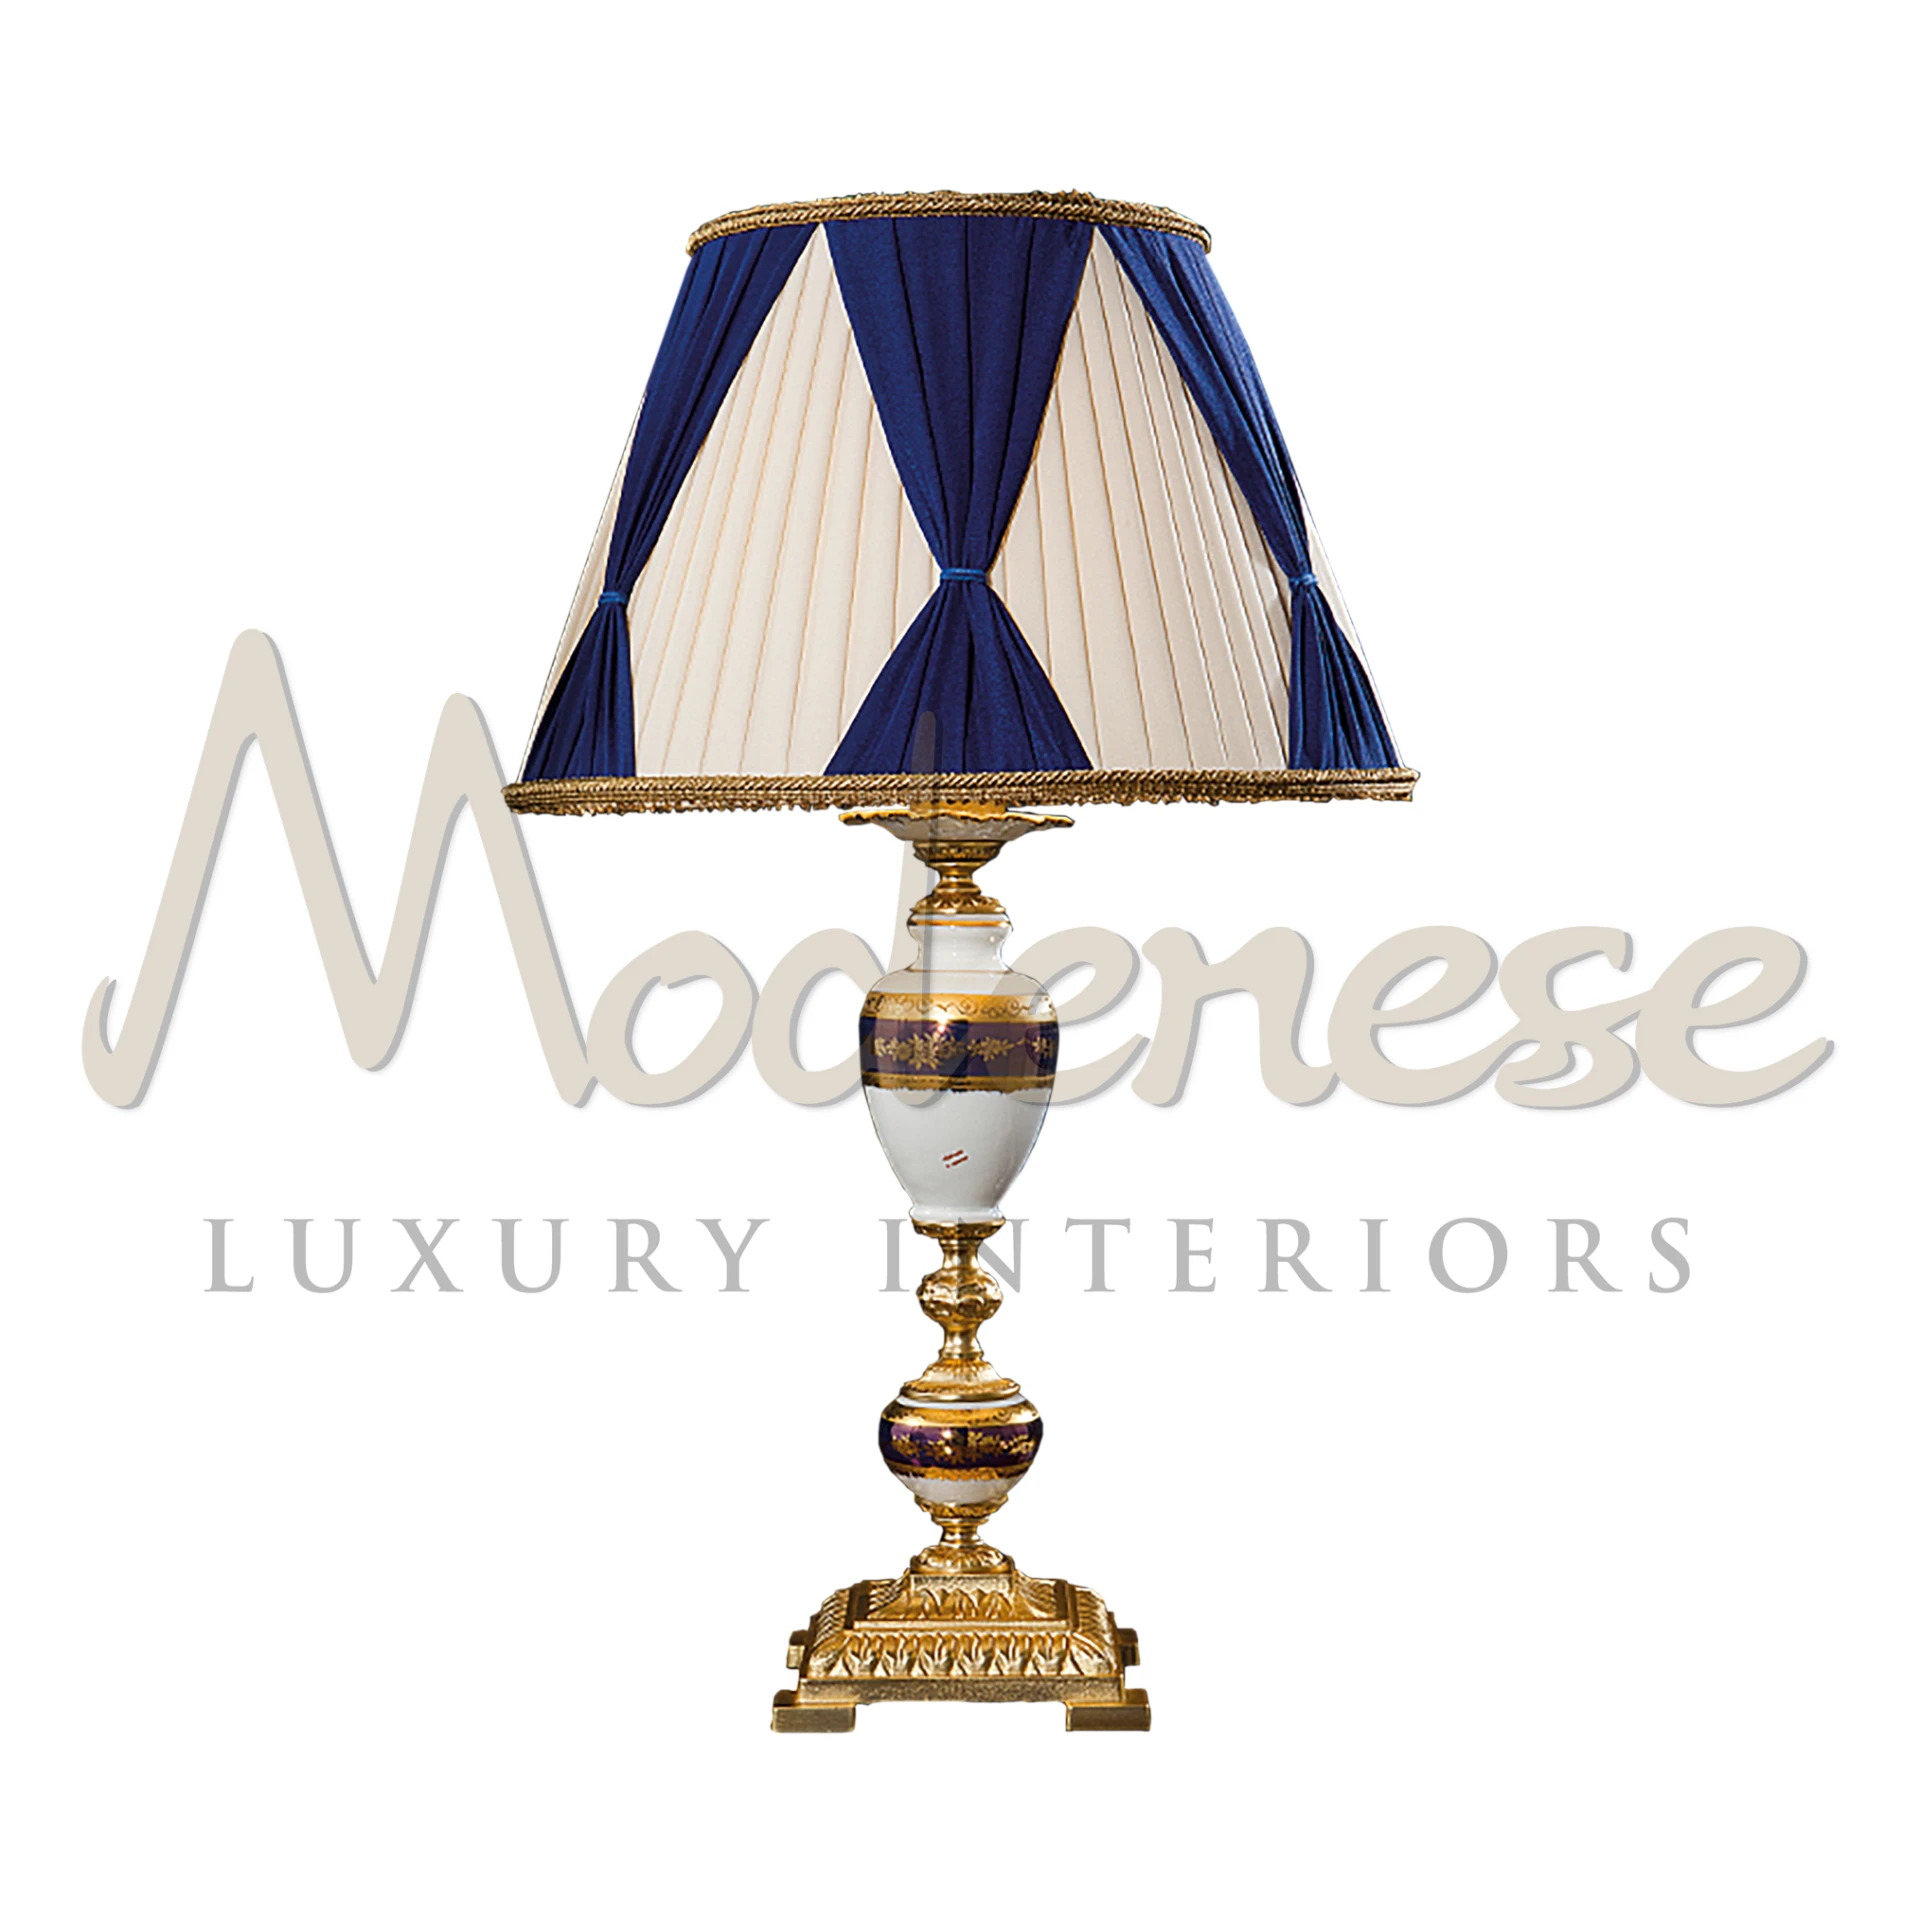 Luxury Porcelain Blue Table Lamp with elegant blue and gold patterned shade and decorated base.